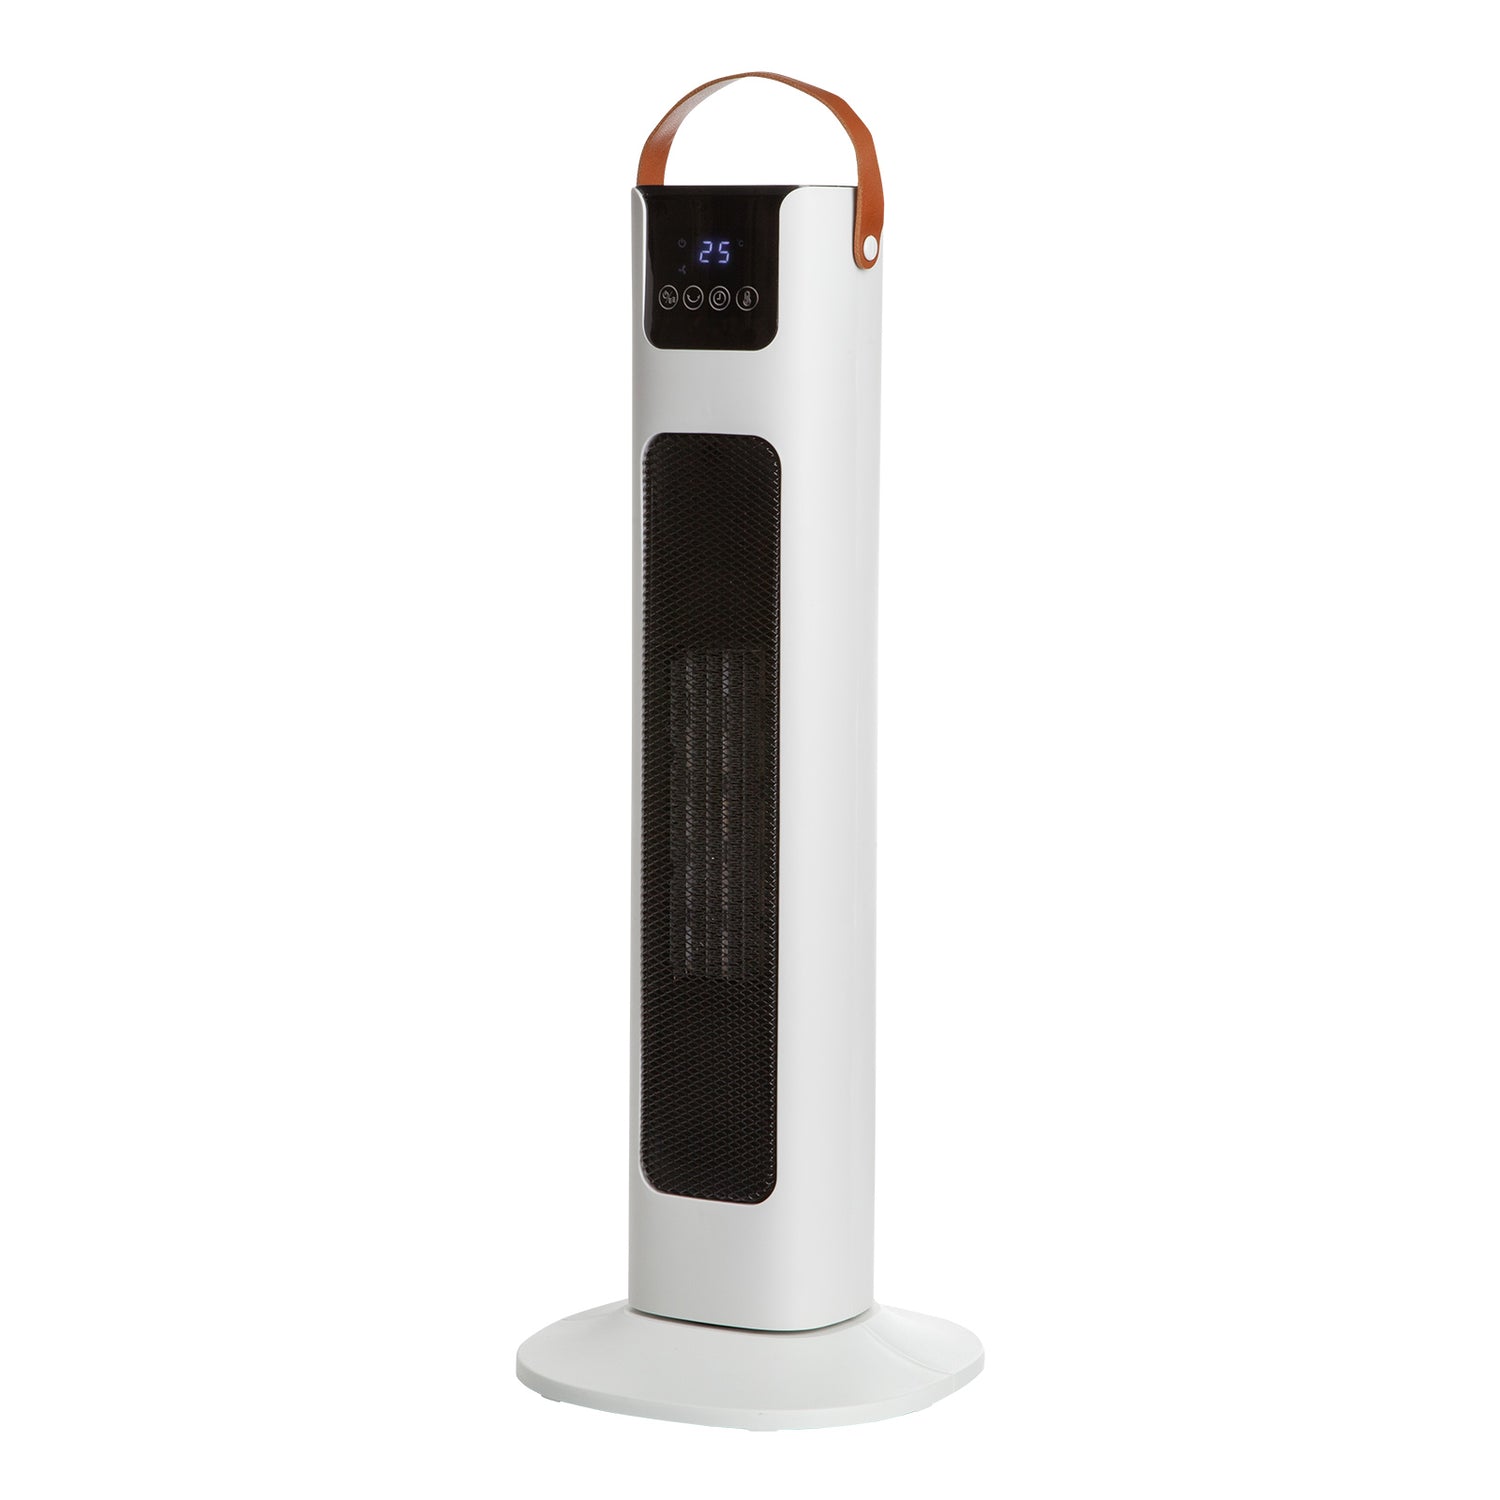 Pursonic Electric Ceramic Tower Heater Portable Oscillating Remote Control-Heating &amp; Cooling-PEROZ Accessories